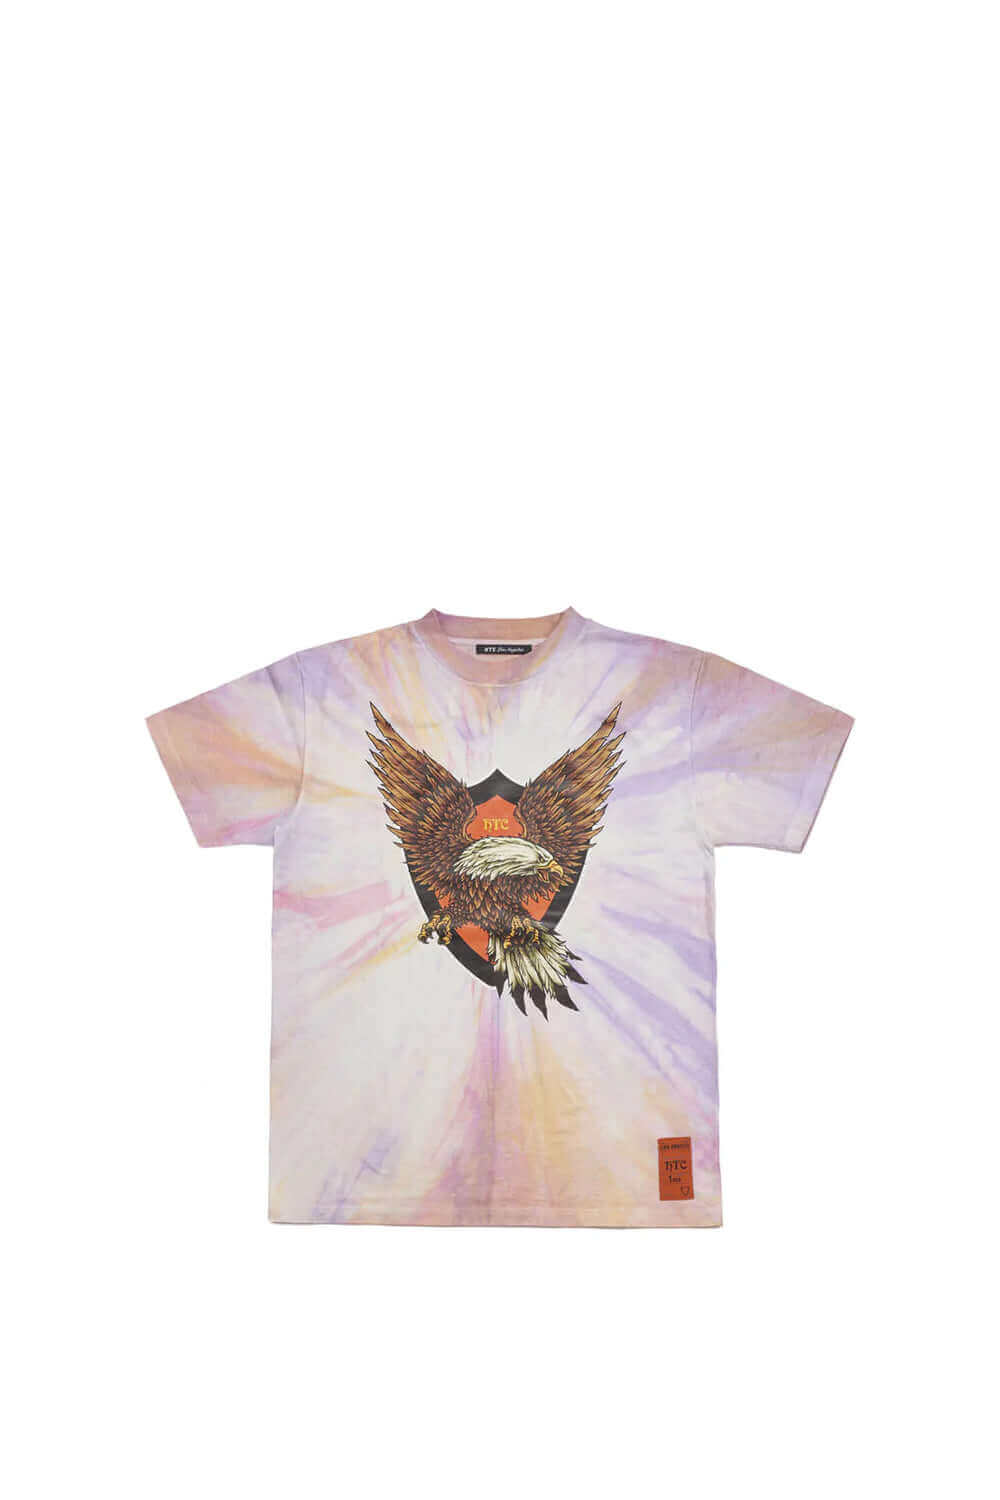 TIE DYE EAGLE T-SHIRT Pink tie-dye t-shirt with front print. 100% cotton. Made in Italy. HTC LOS ANGELES